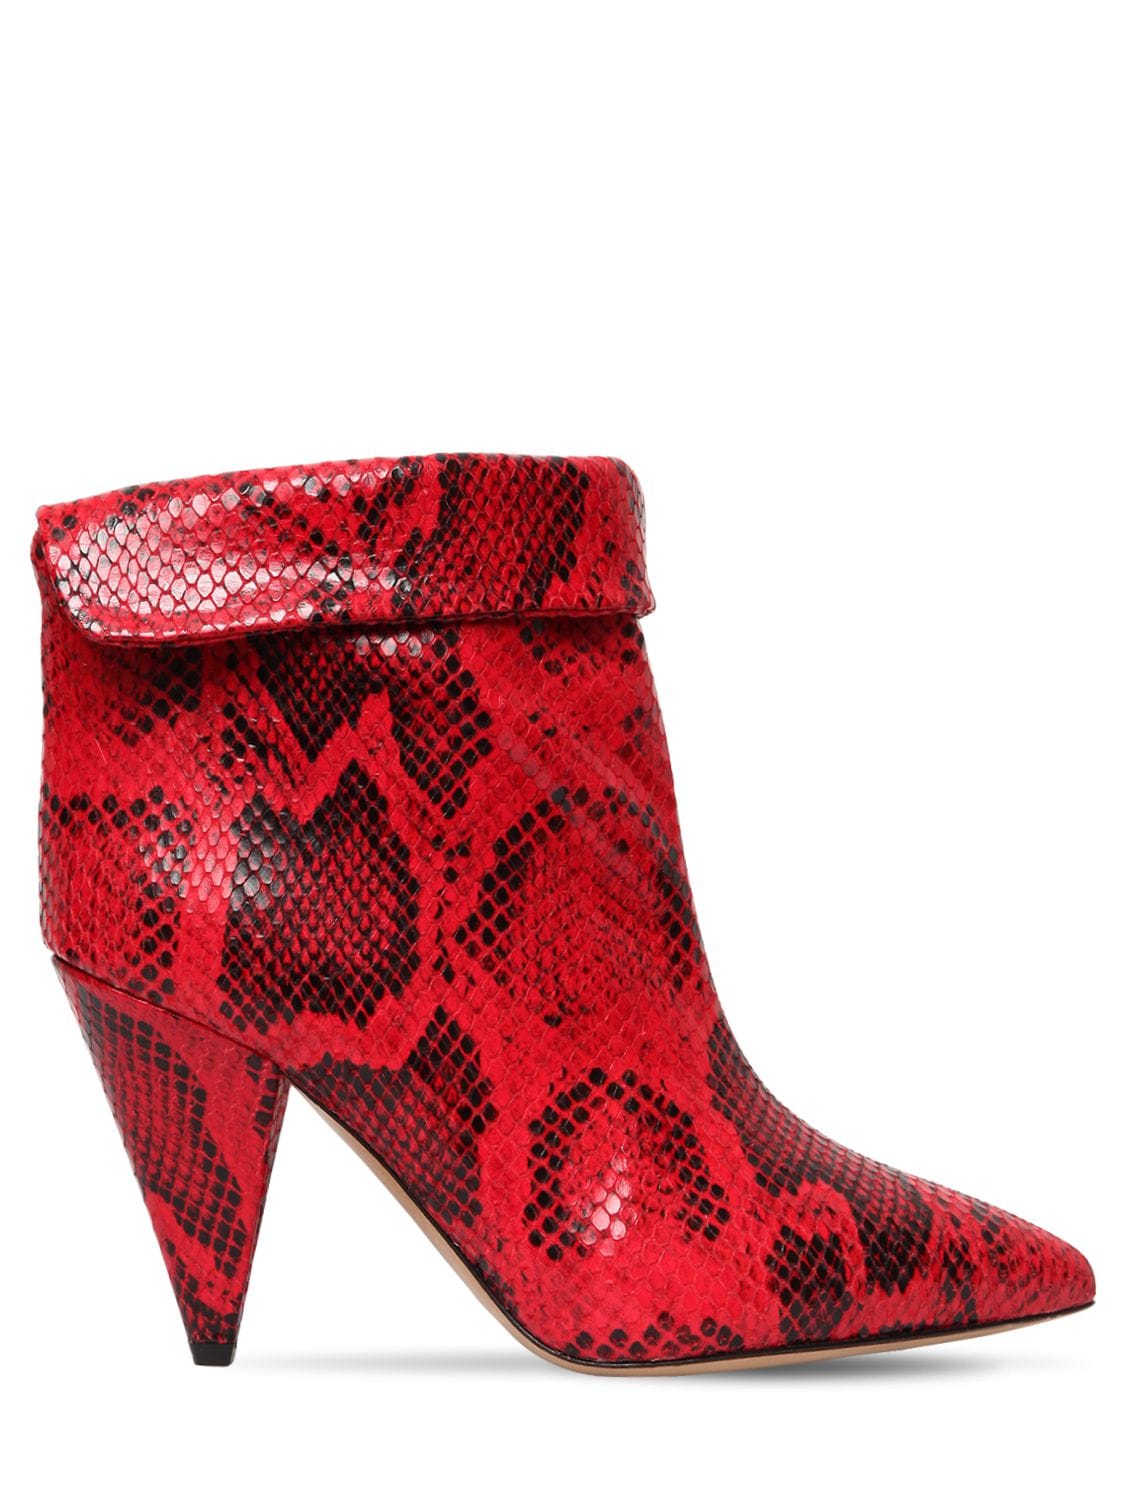 ISABEL MARANT 90MM LISBO PYTHON PRINTED LEATHER BOOTS,69IE1C001-NZBSRA2